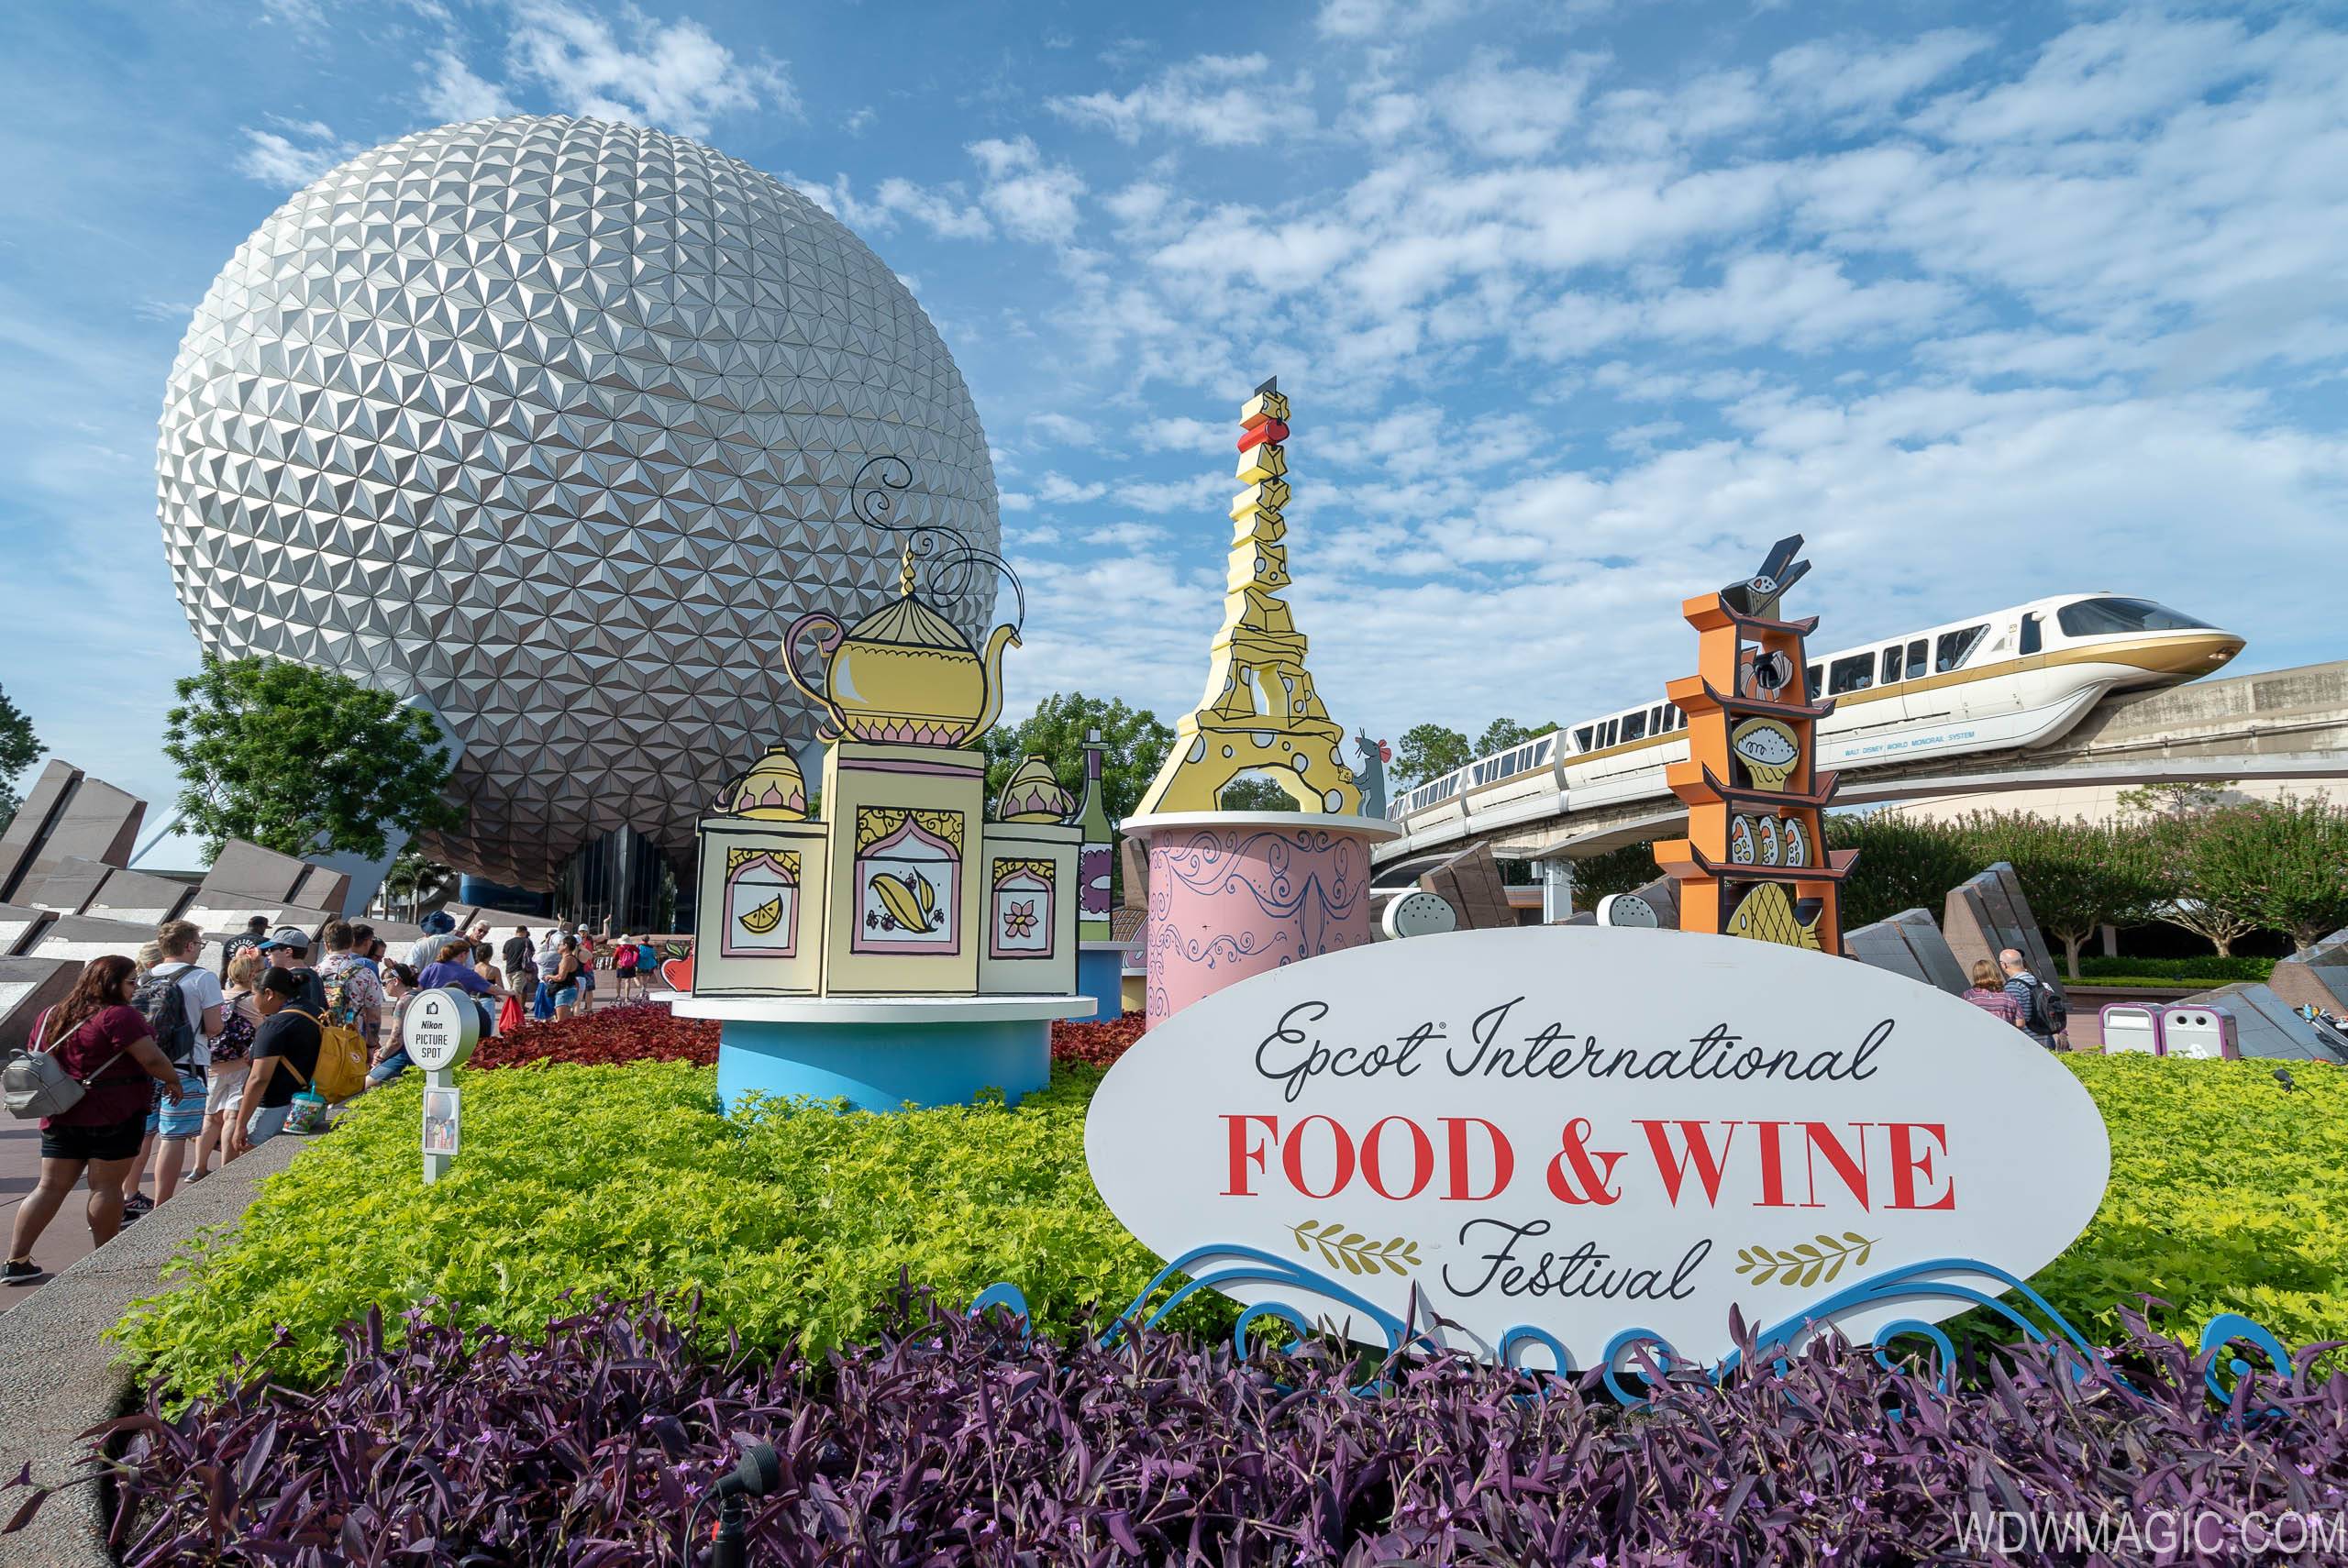 PHOTOS - The 2018 Epcot International Food and Wine Festival is now open